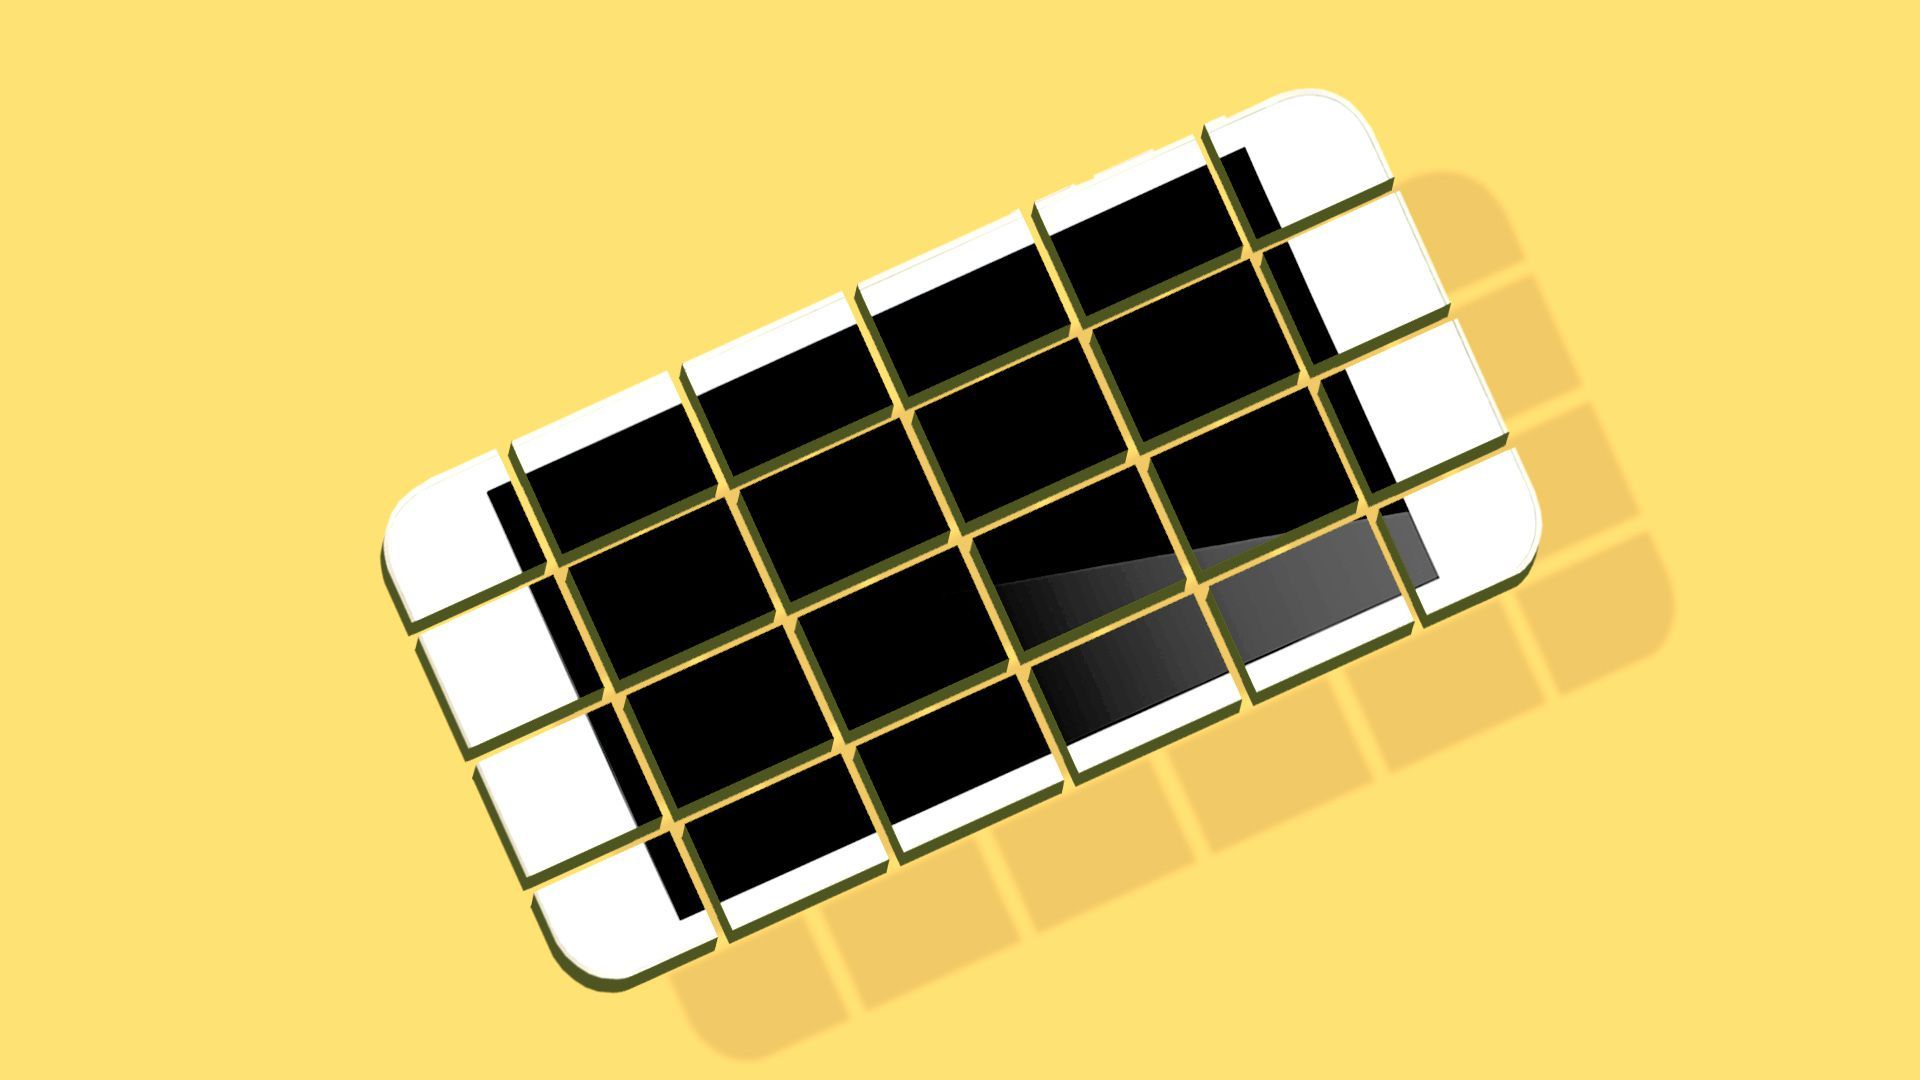 Illustration of a smartphone split and divided into smaller rectangles